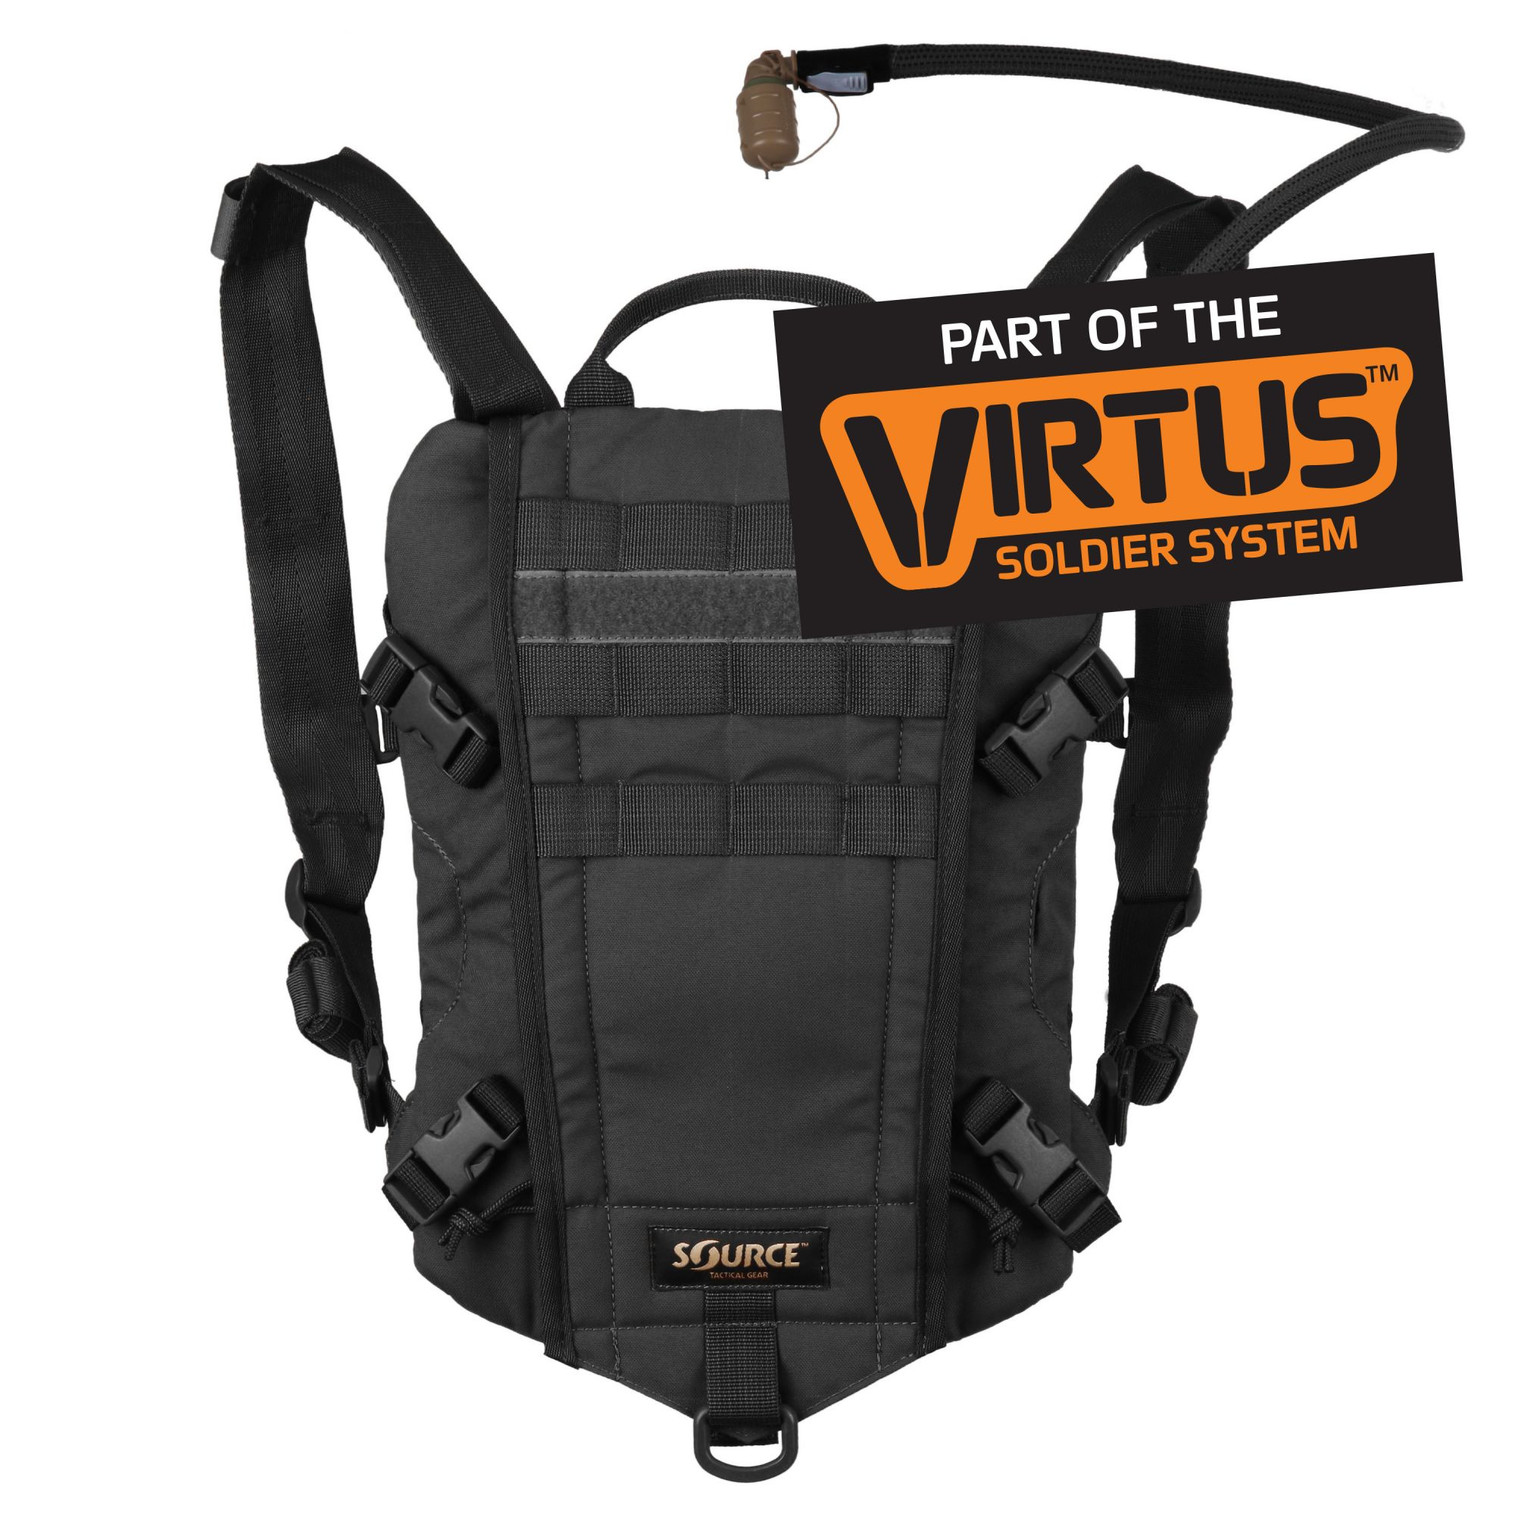 Rider 3l Low Profile Molle Tactical Hydration Pack